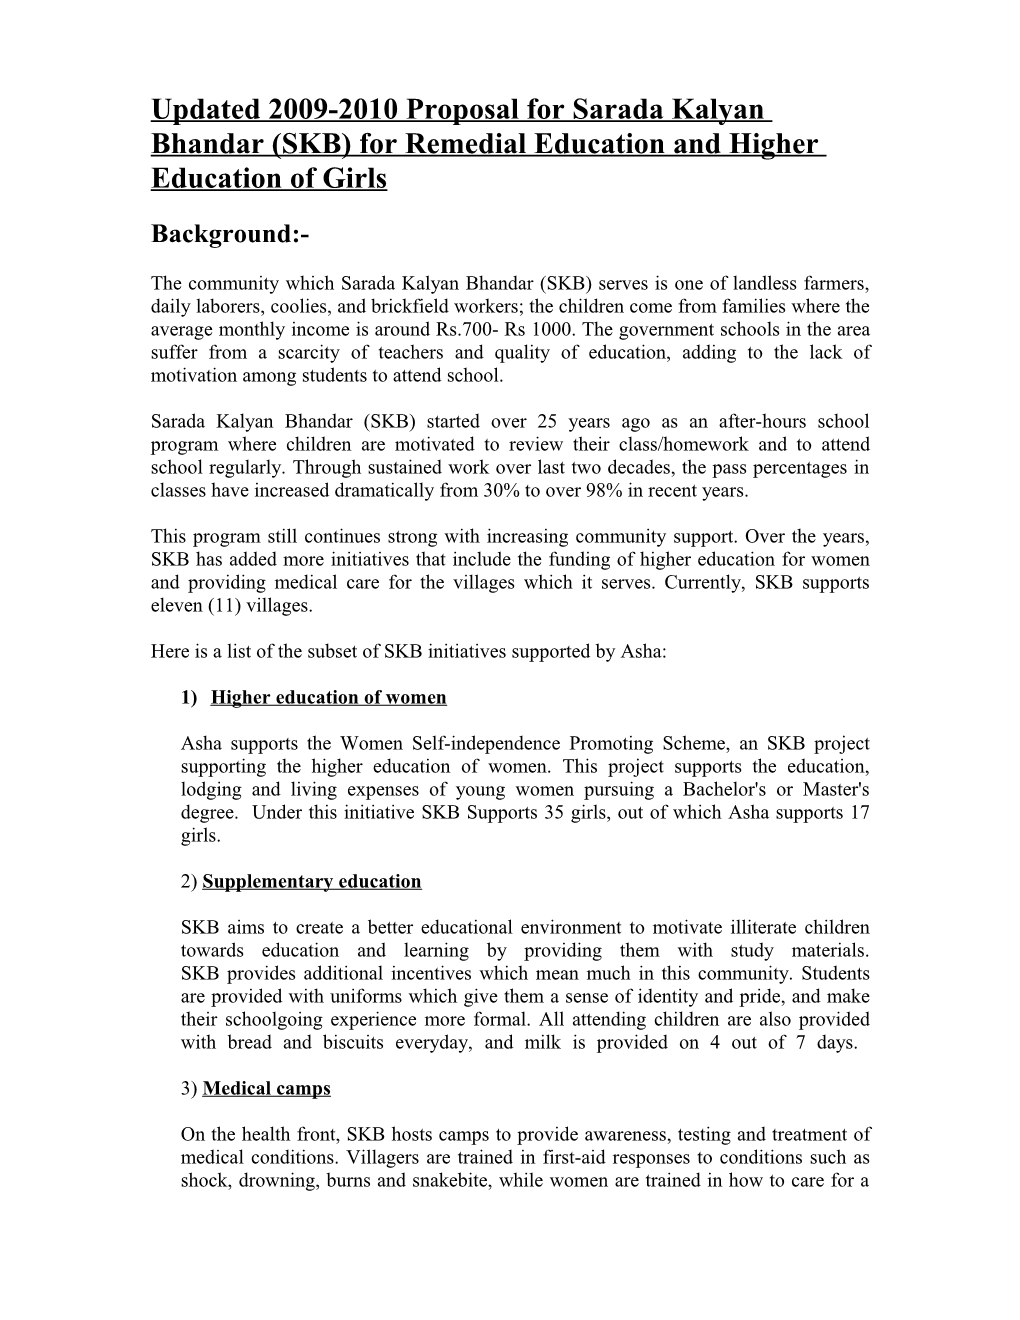 WAH Proposal for Sarada Kalyan Bhandar (SKB) for Remedial Education and Higher Education